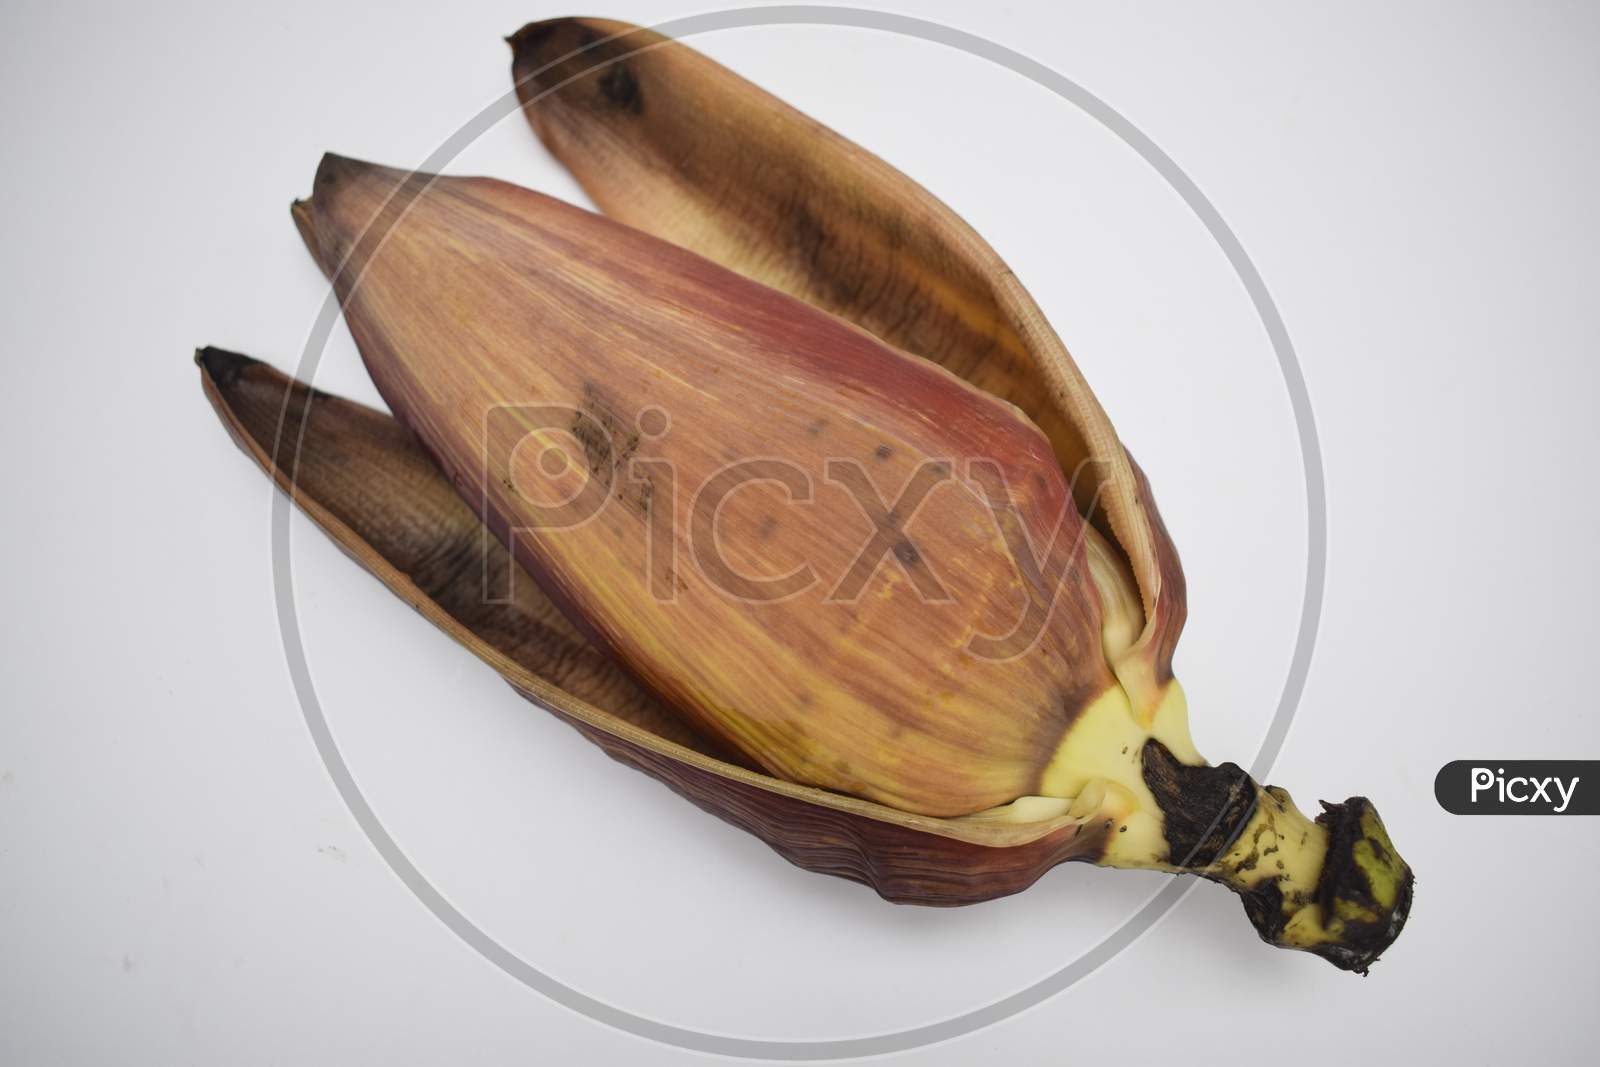 Raw Banana Flower Opened Leaves On White Background. Also Known As Banana Blossoms Eaten In Cuisine Cooked In South Asia